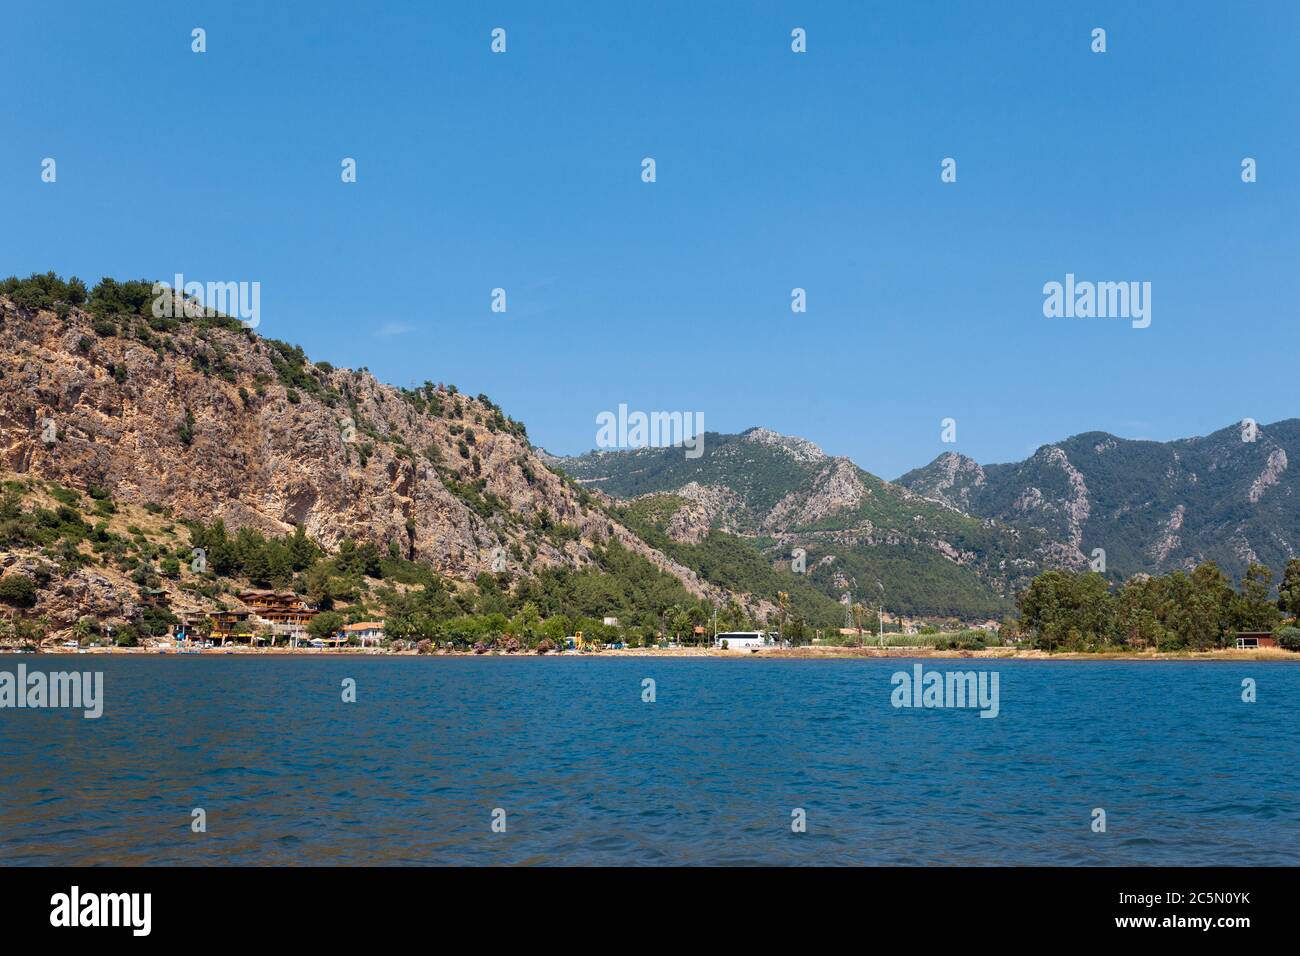 View from the sea on a tourist village on the background of a brown mountain Stock Photo